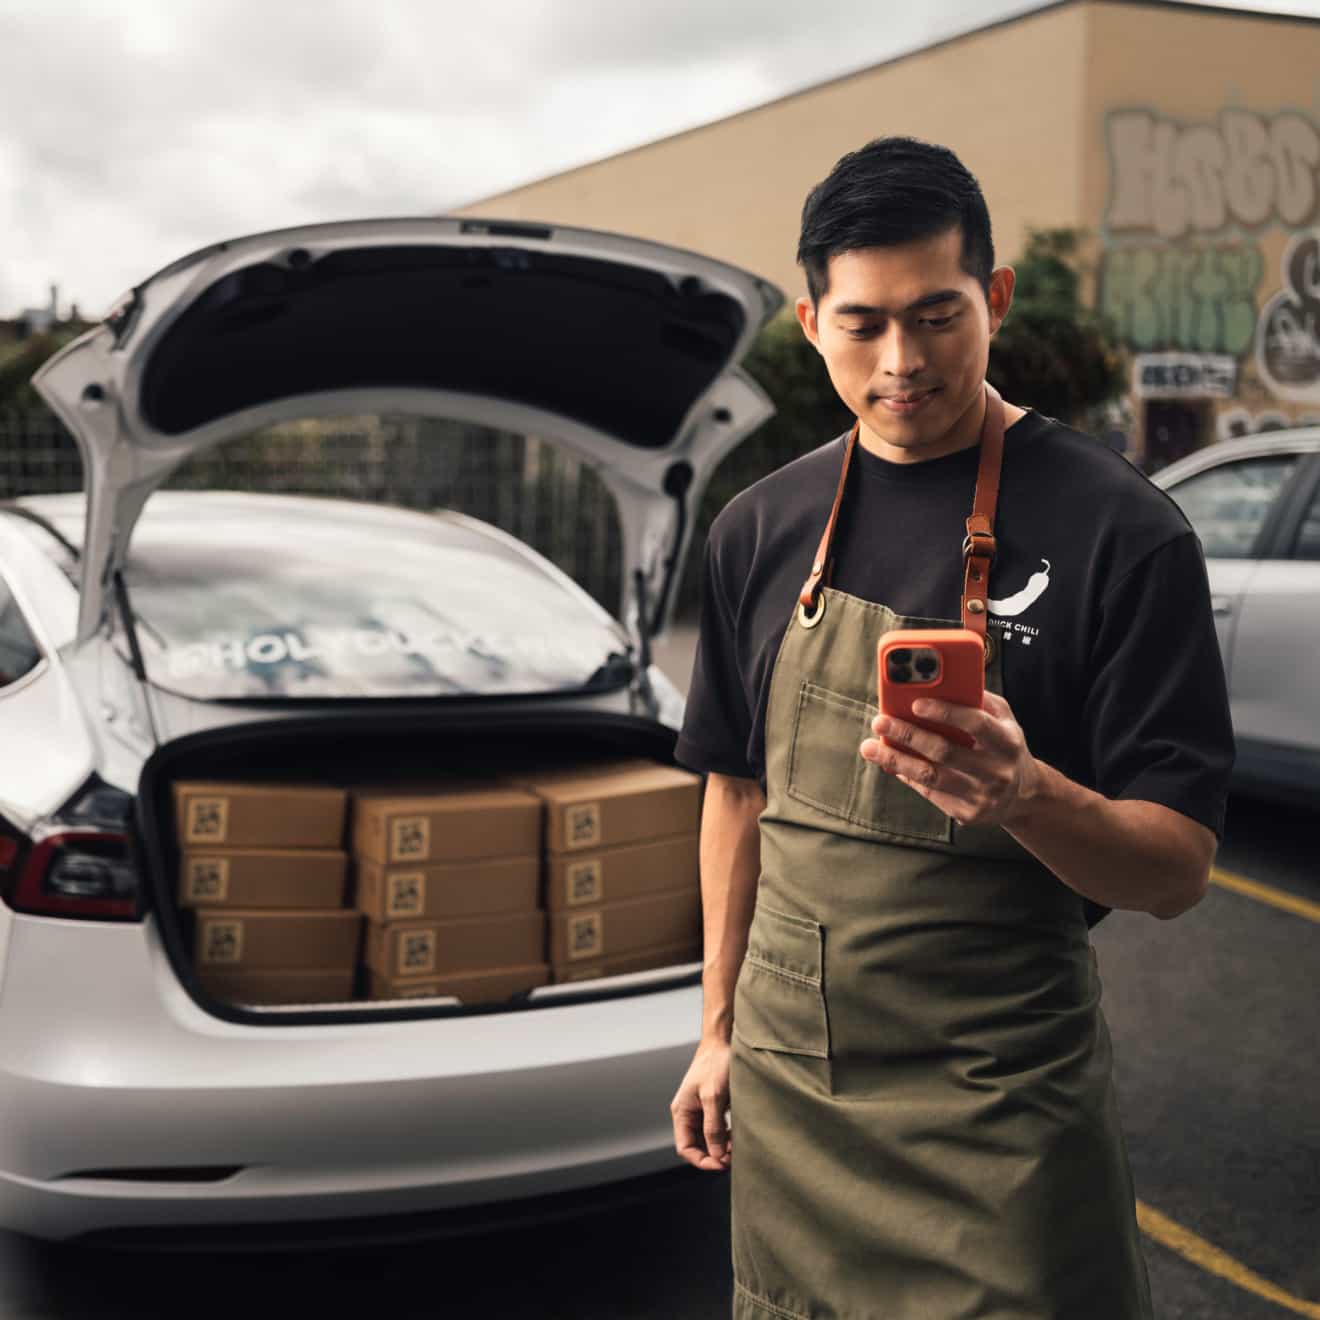 Small-business owner using a phone to keep track of time, with orders prepared for delivery in a car trunk.